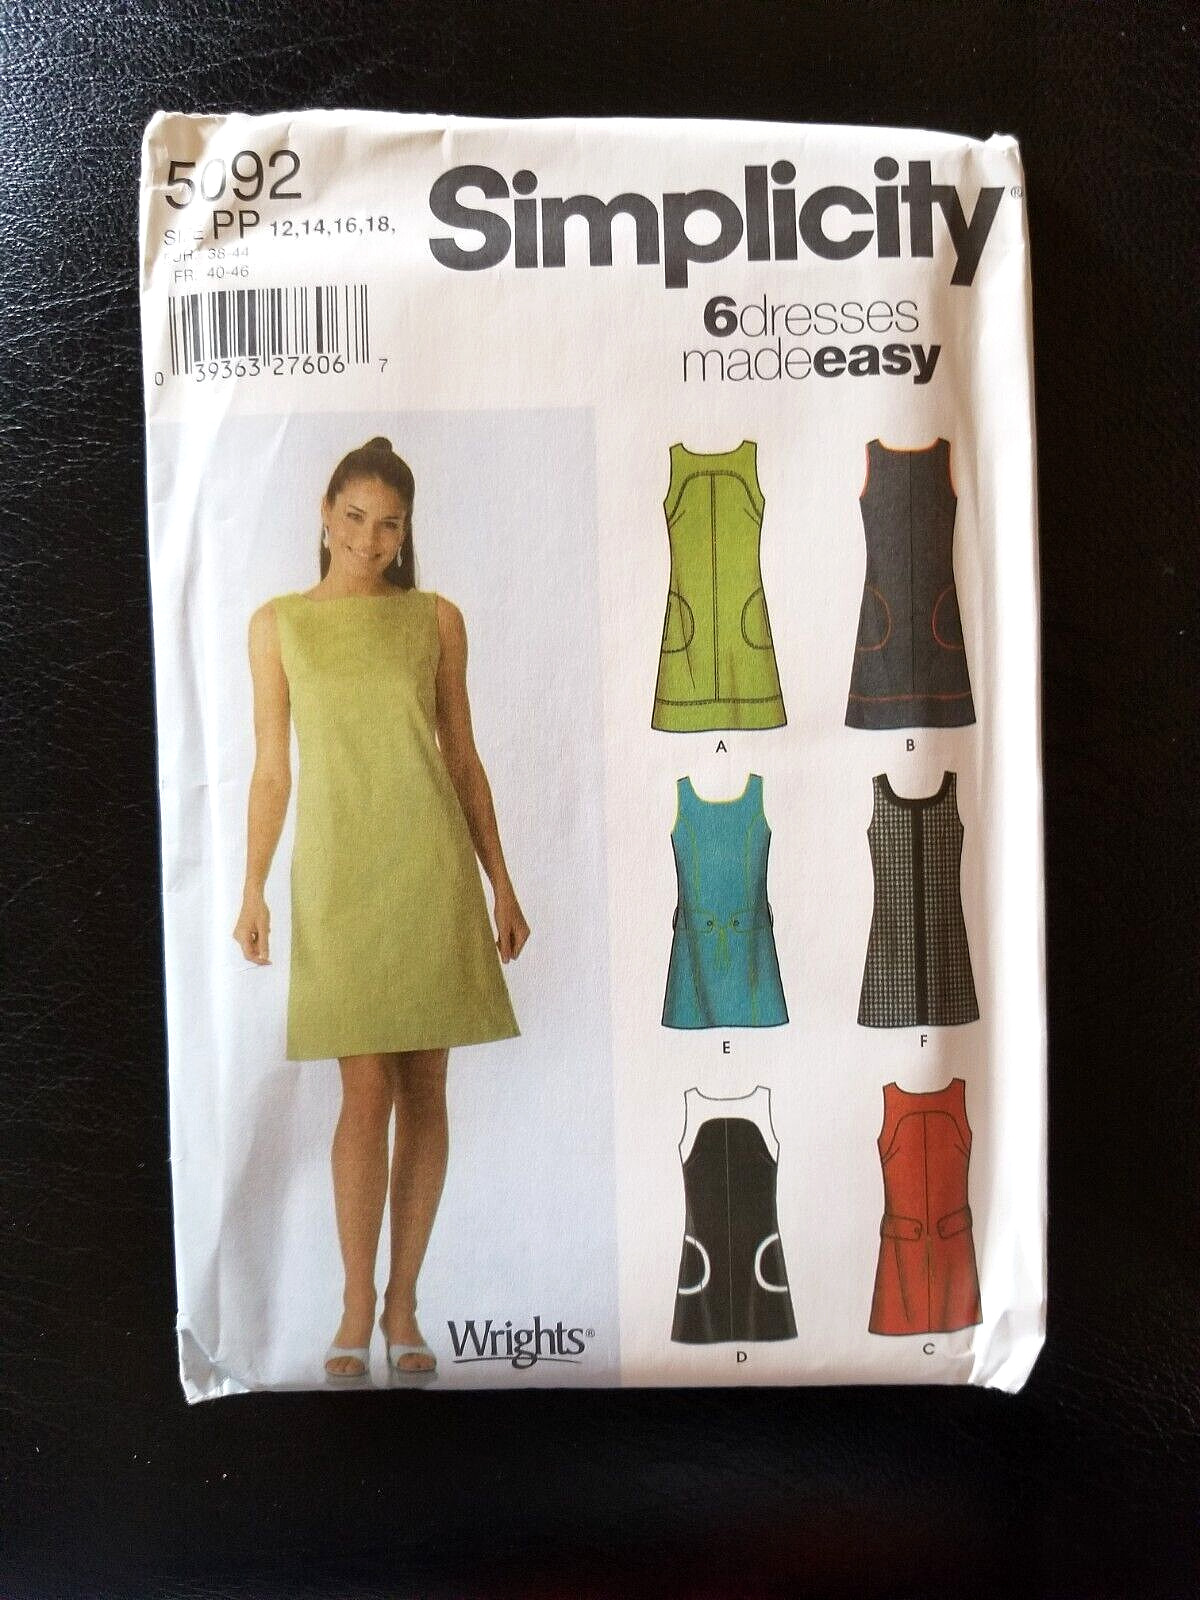 Simplicity 5092 Size PP 12-14-16-18 Sewing Pattern UNCUT 6 Sun Dresses Made Easy